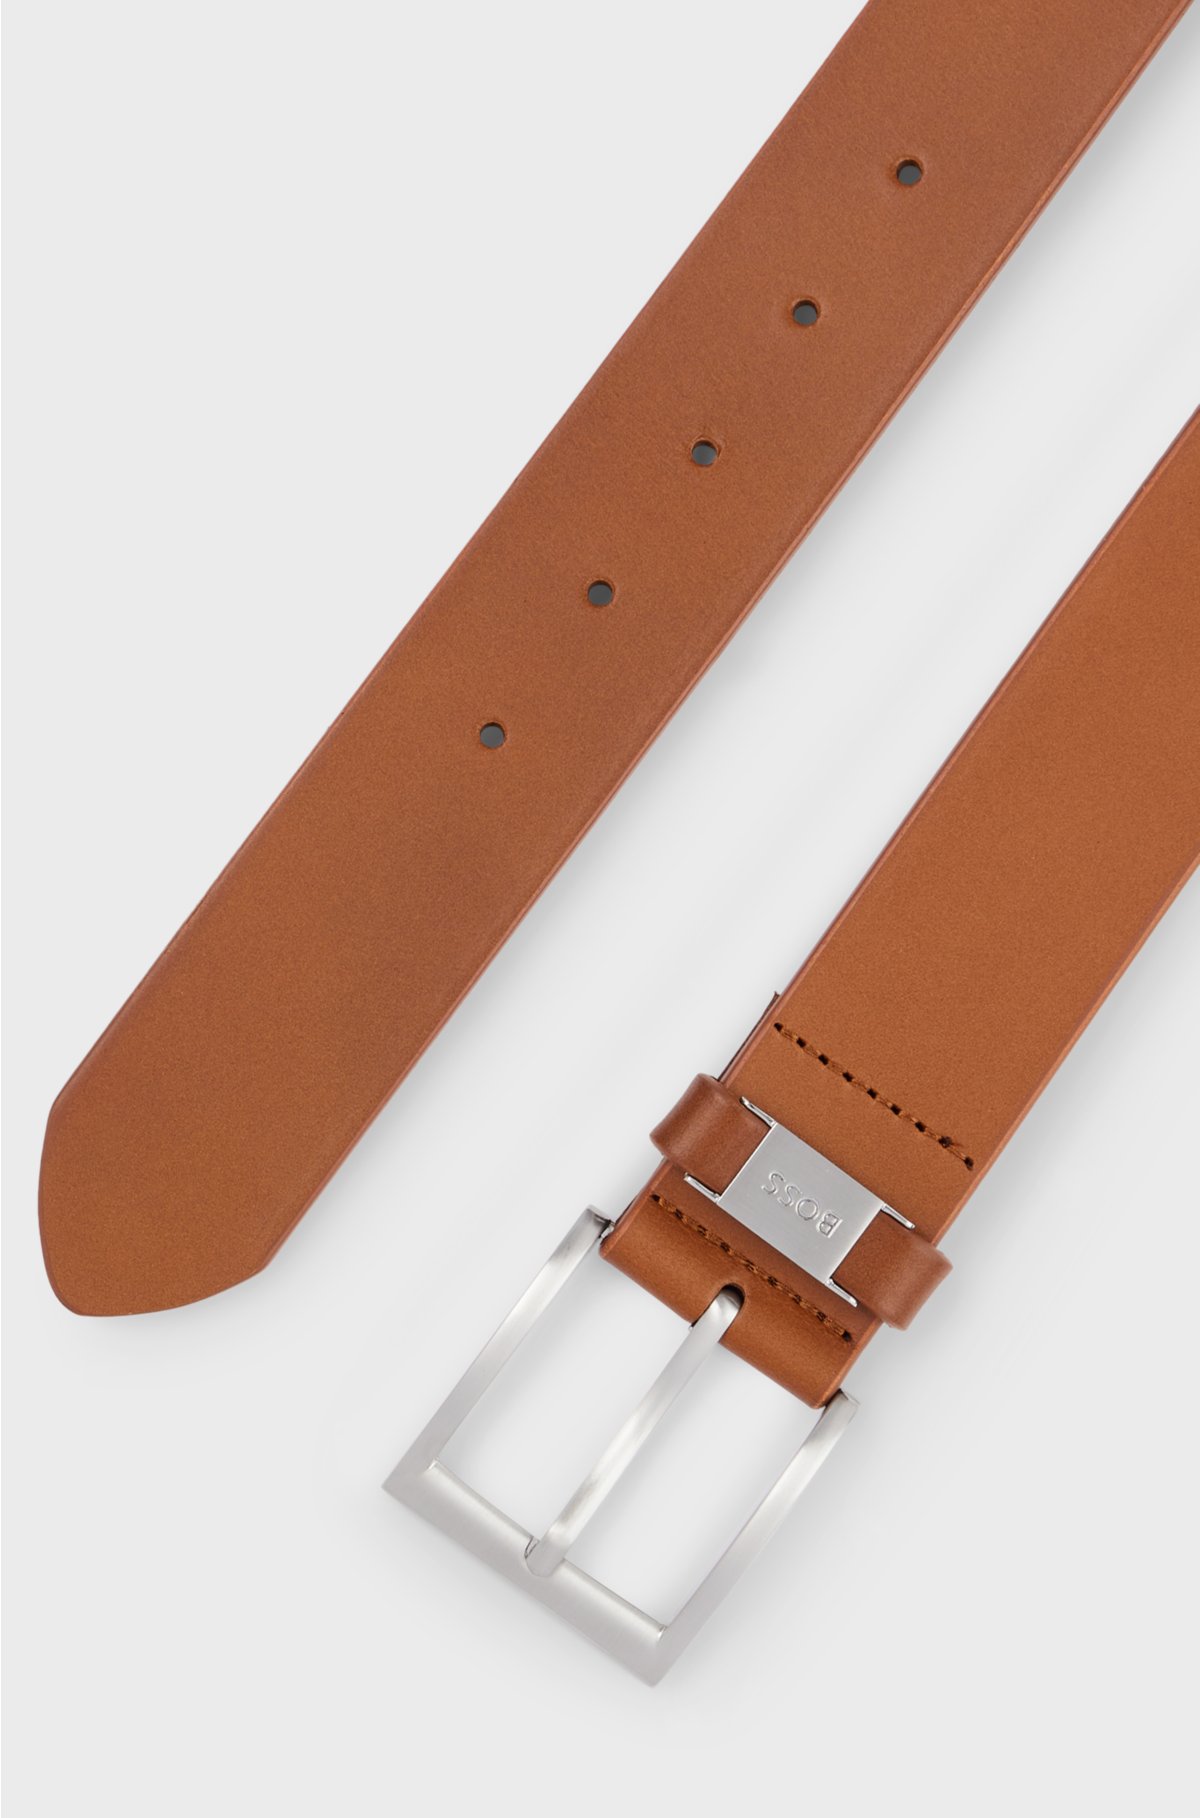 Italian-leather belt with logo keeper and brushed hardware, Brown